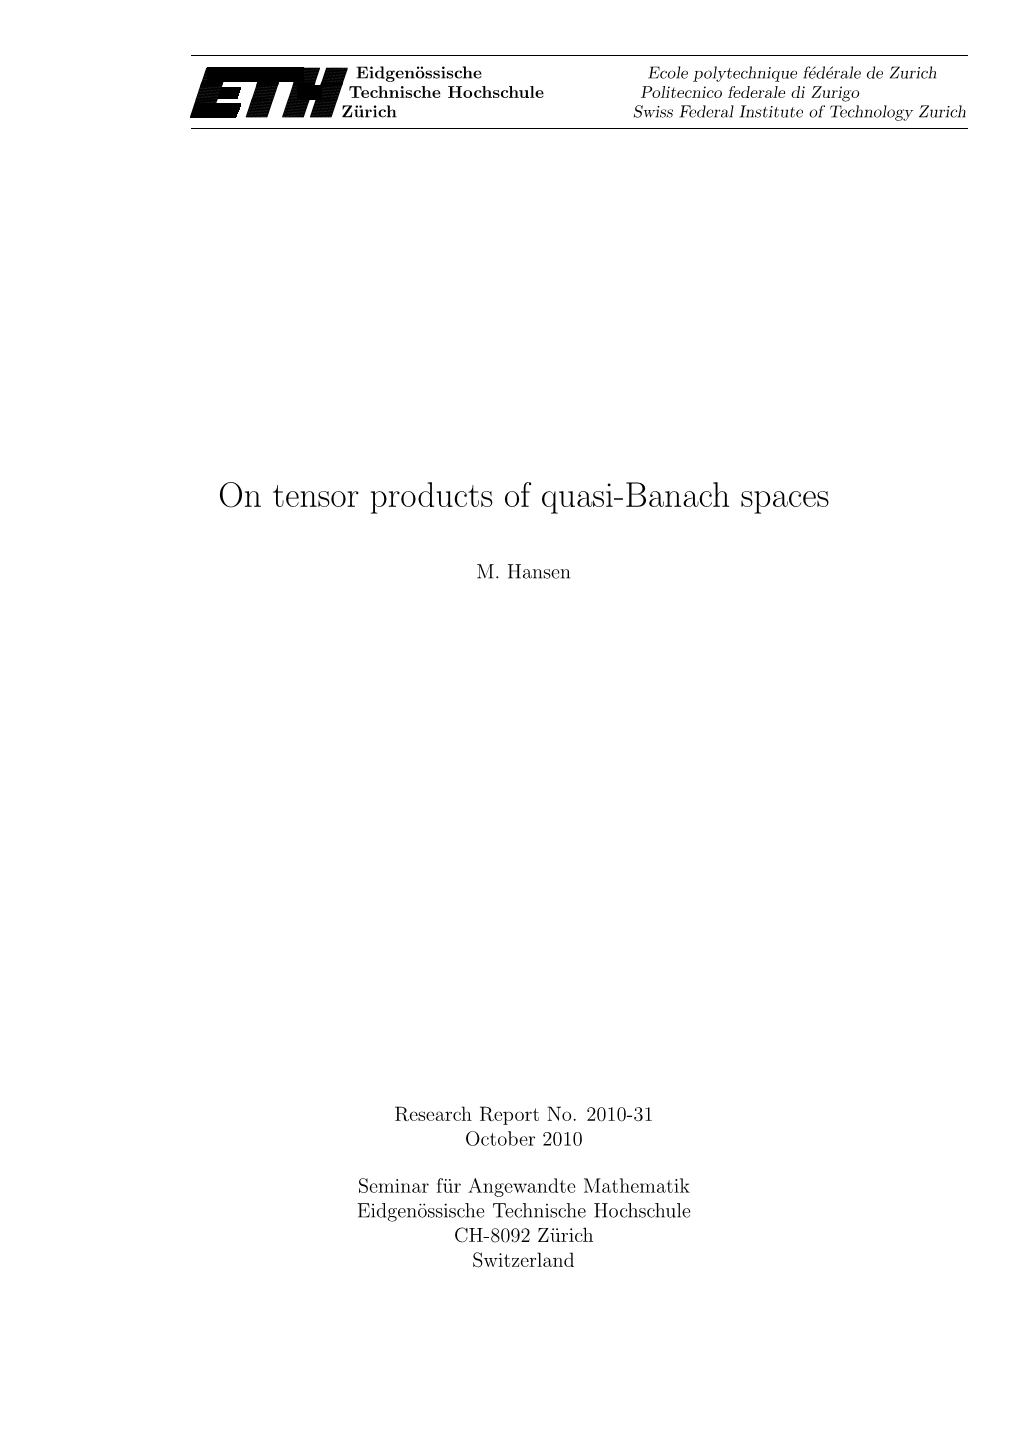 On Tensor Products of Quasi-Banach Spaces